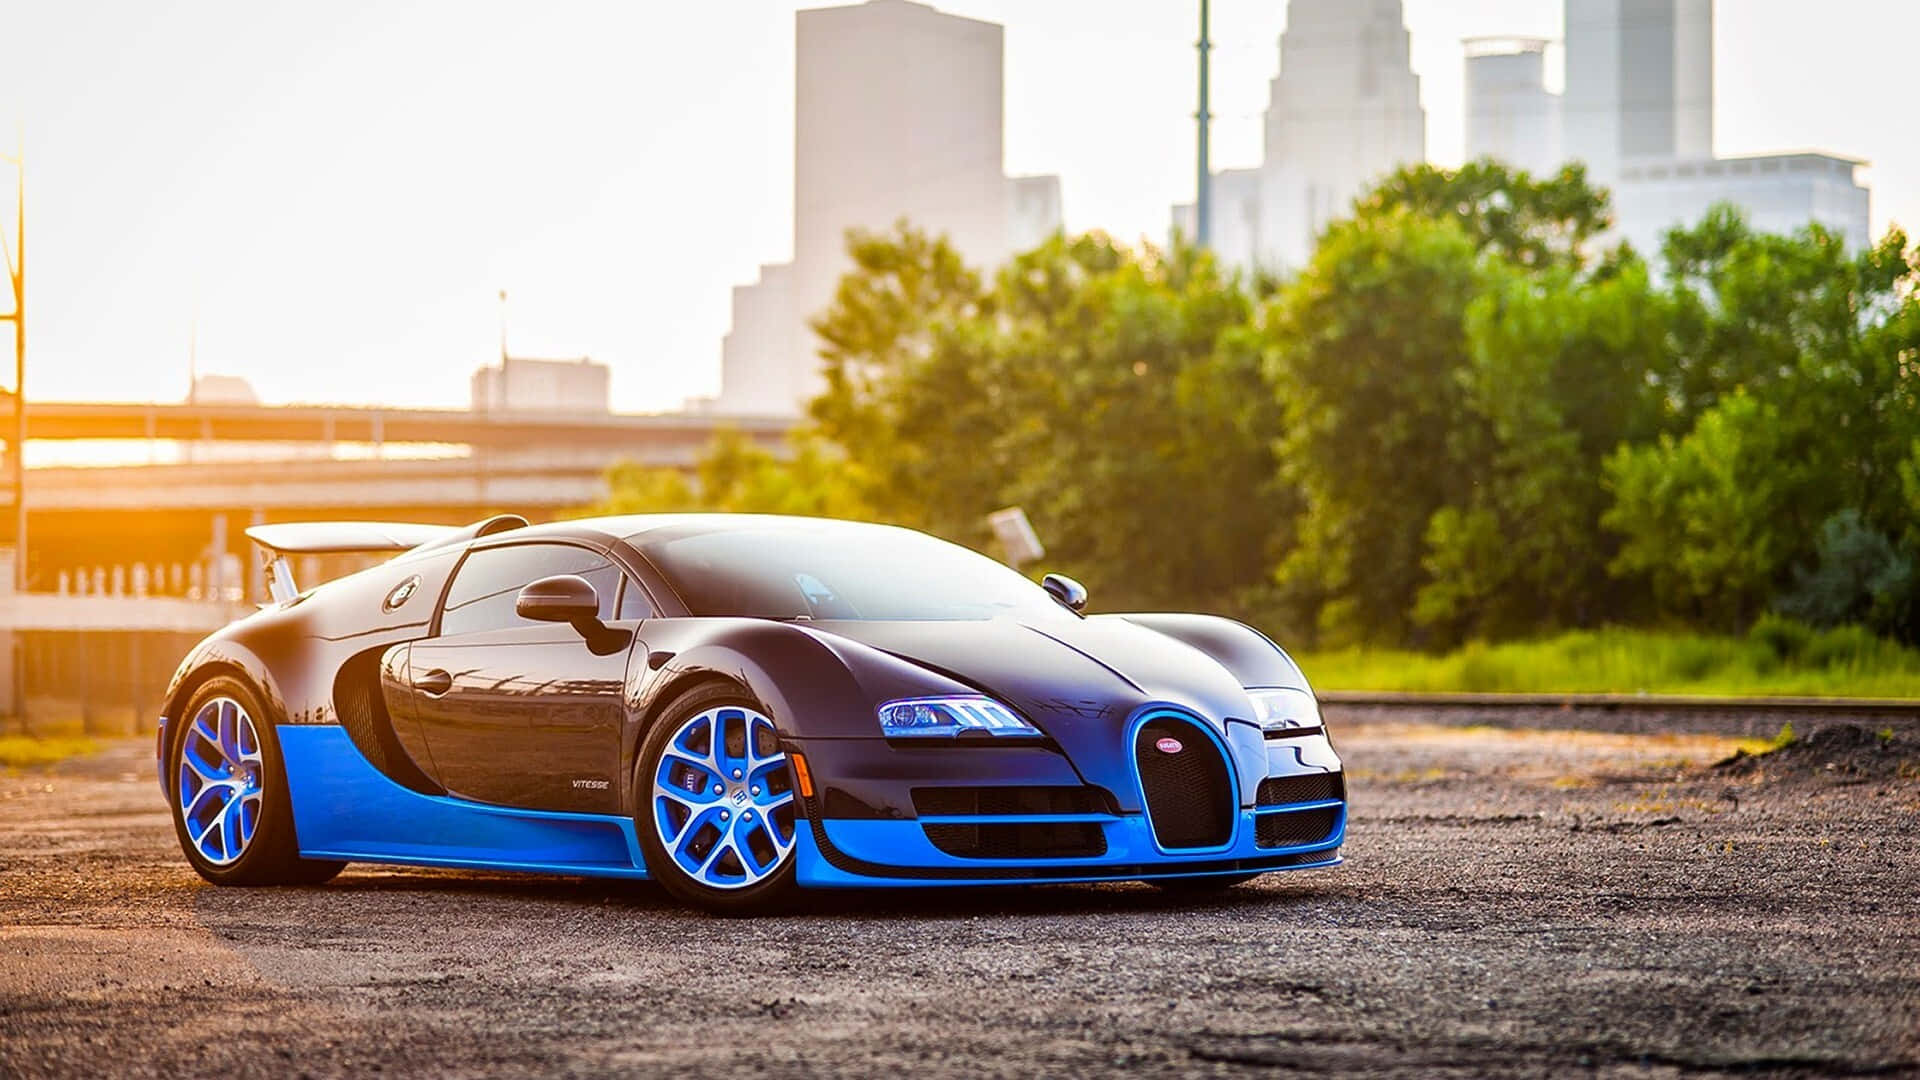 On the Road with a Striking Bugatti Wallpaper